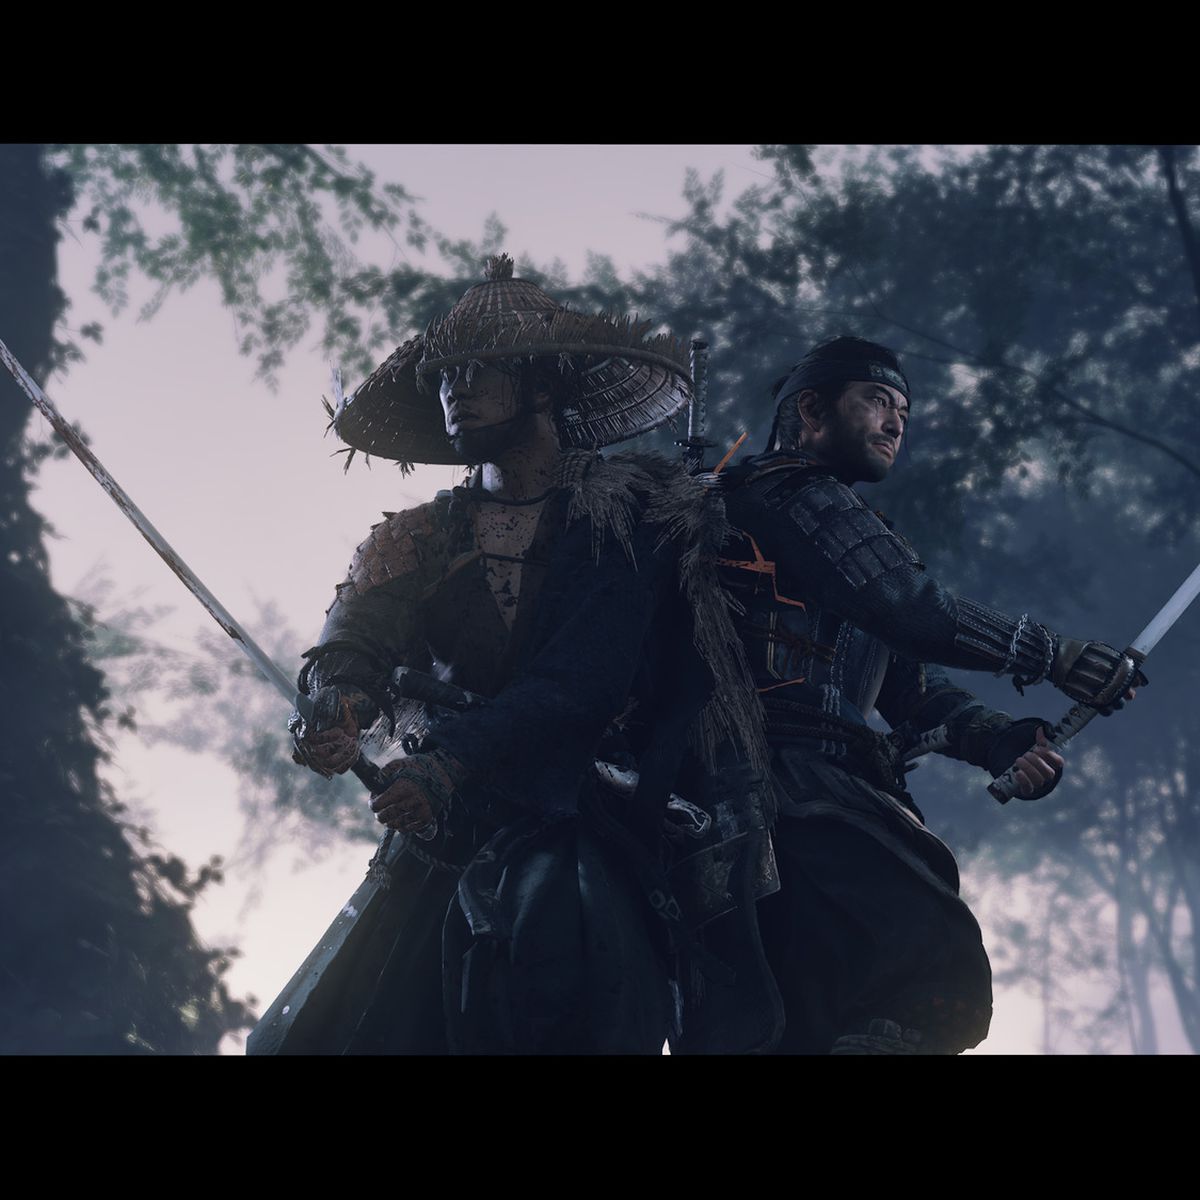 Two characters fight together with swords, back to back, in a forest in Ghost of Tsushima